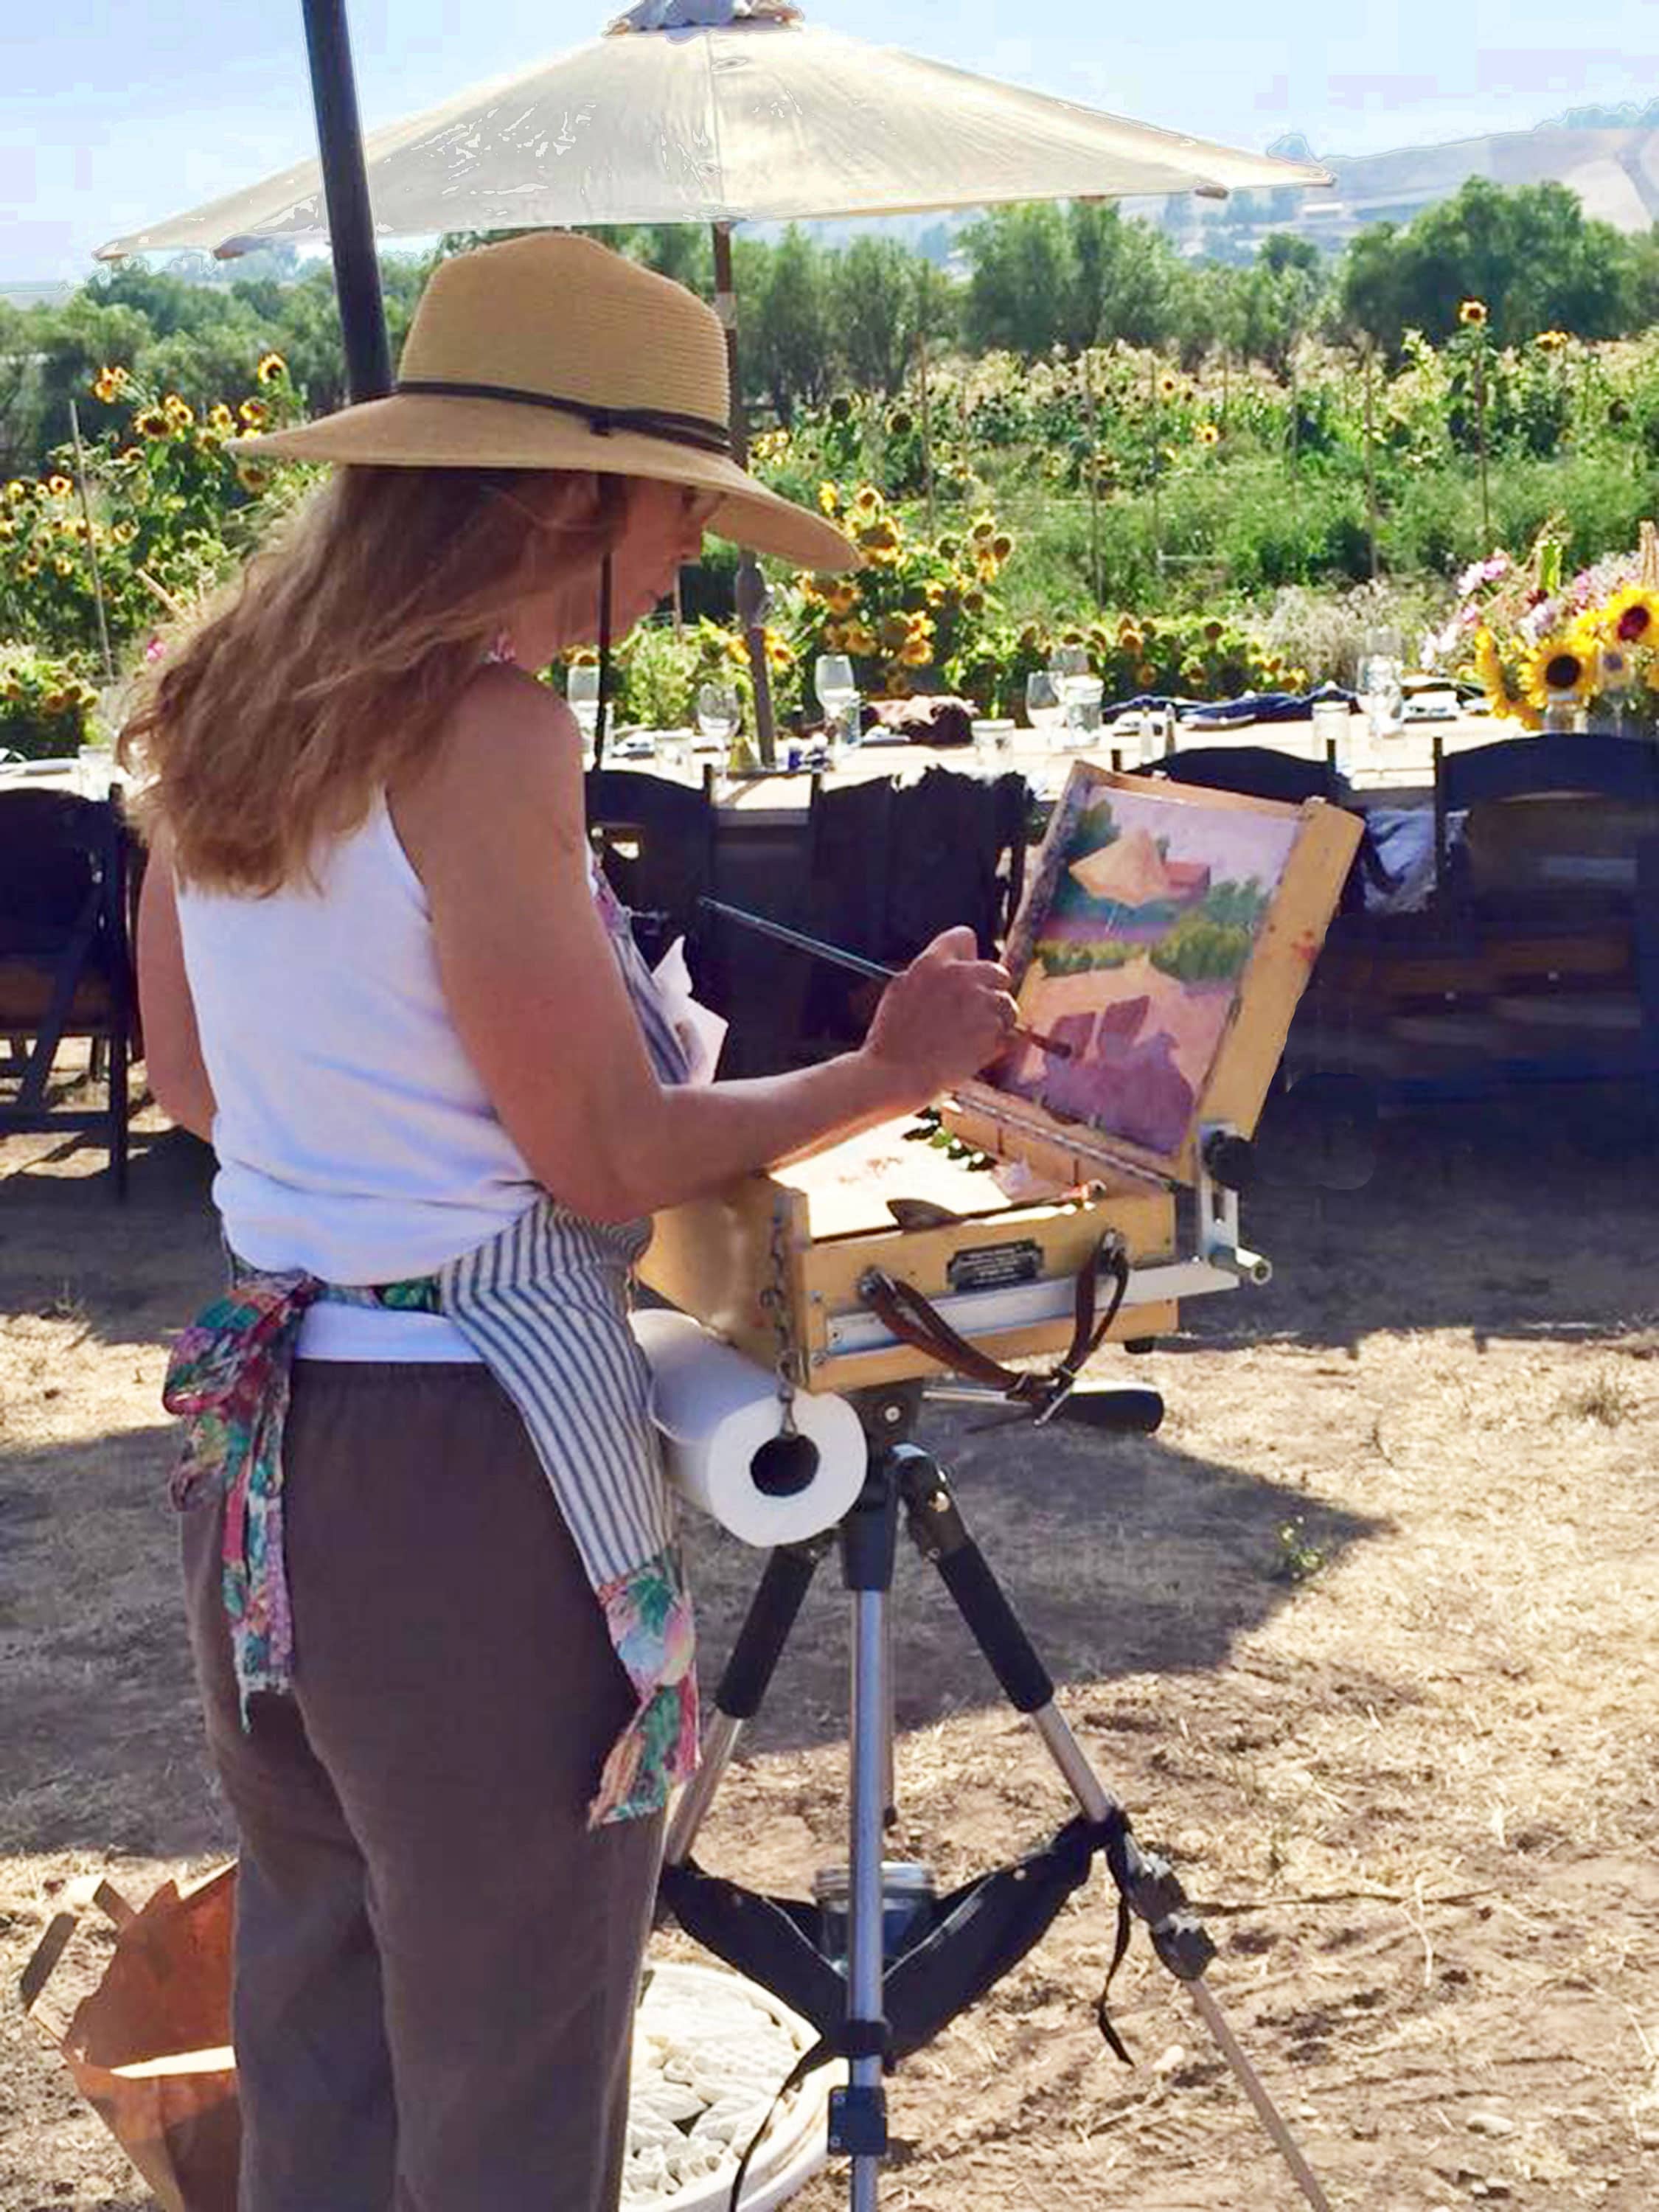 Two Pochade Box Stories You Just Have to Read - OutdoorPainter